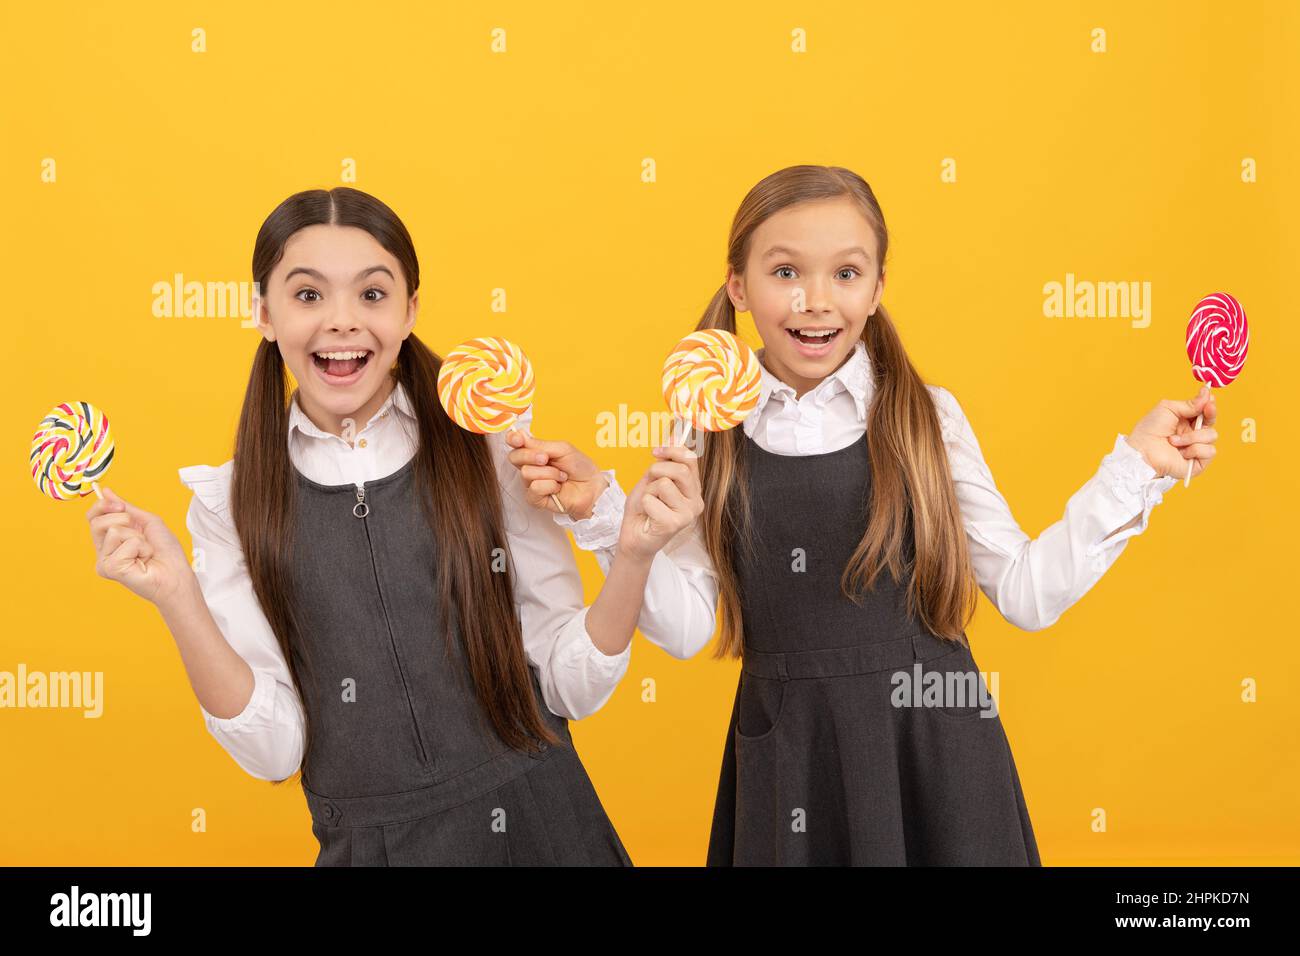 Happy kids in formal uniforms hold lollipops sweet treats yellow background, cheer Stock Photo